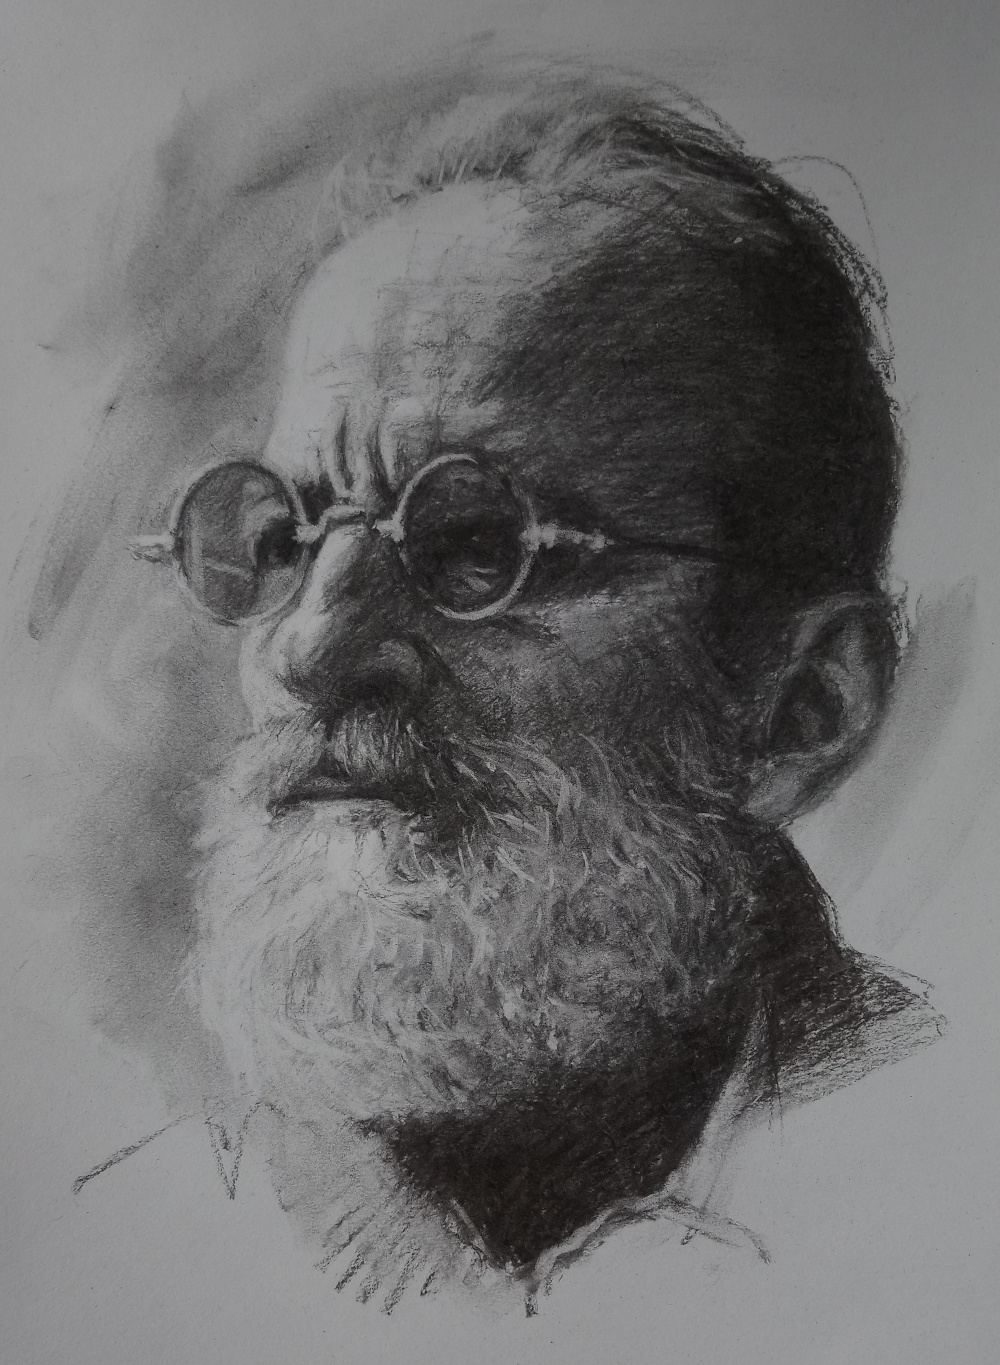 Drawing an old man with glasses and a beard